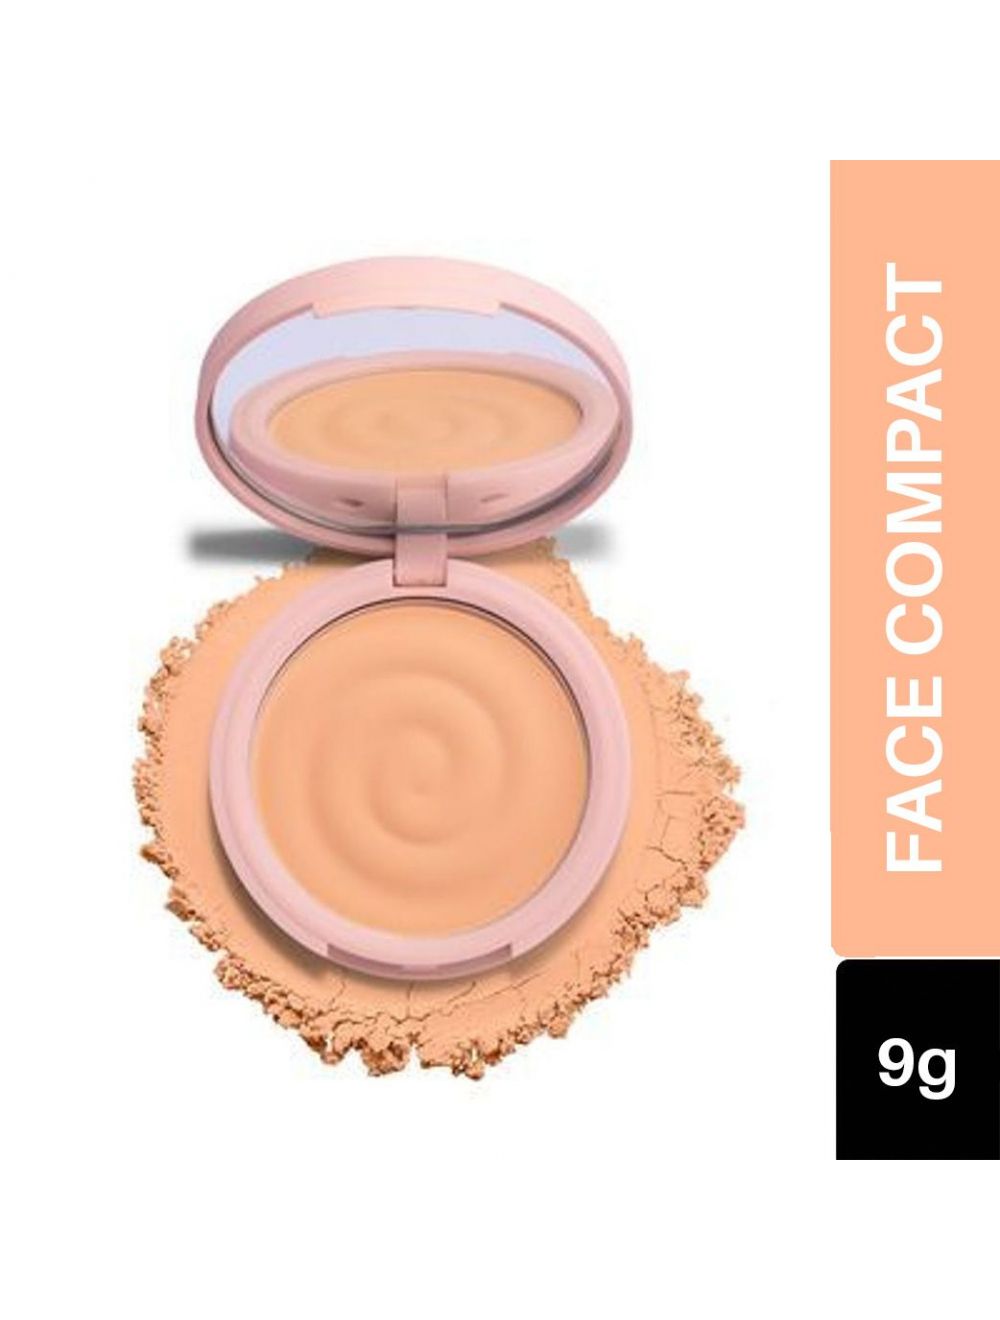 MyGlamm K.play Flavoured Compact - French Vanilla (9gm)